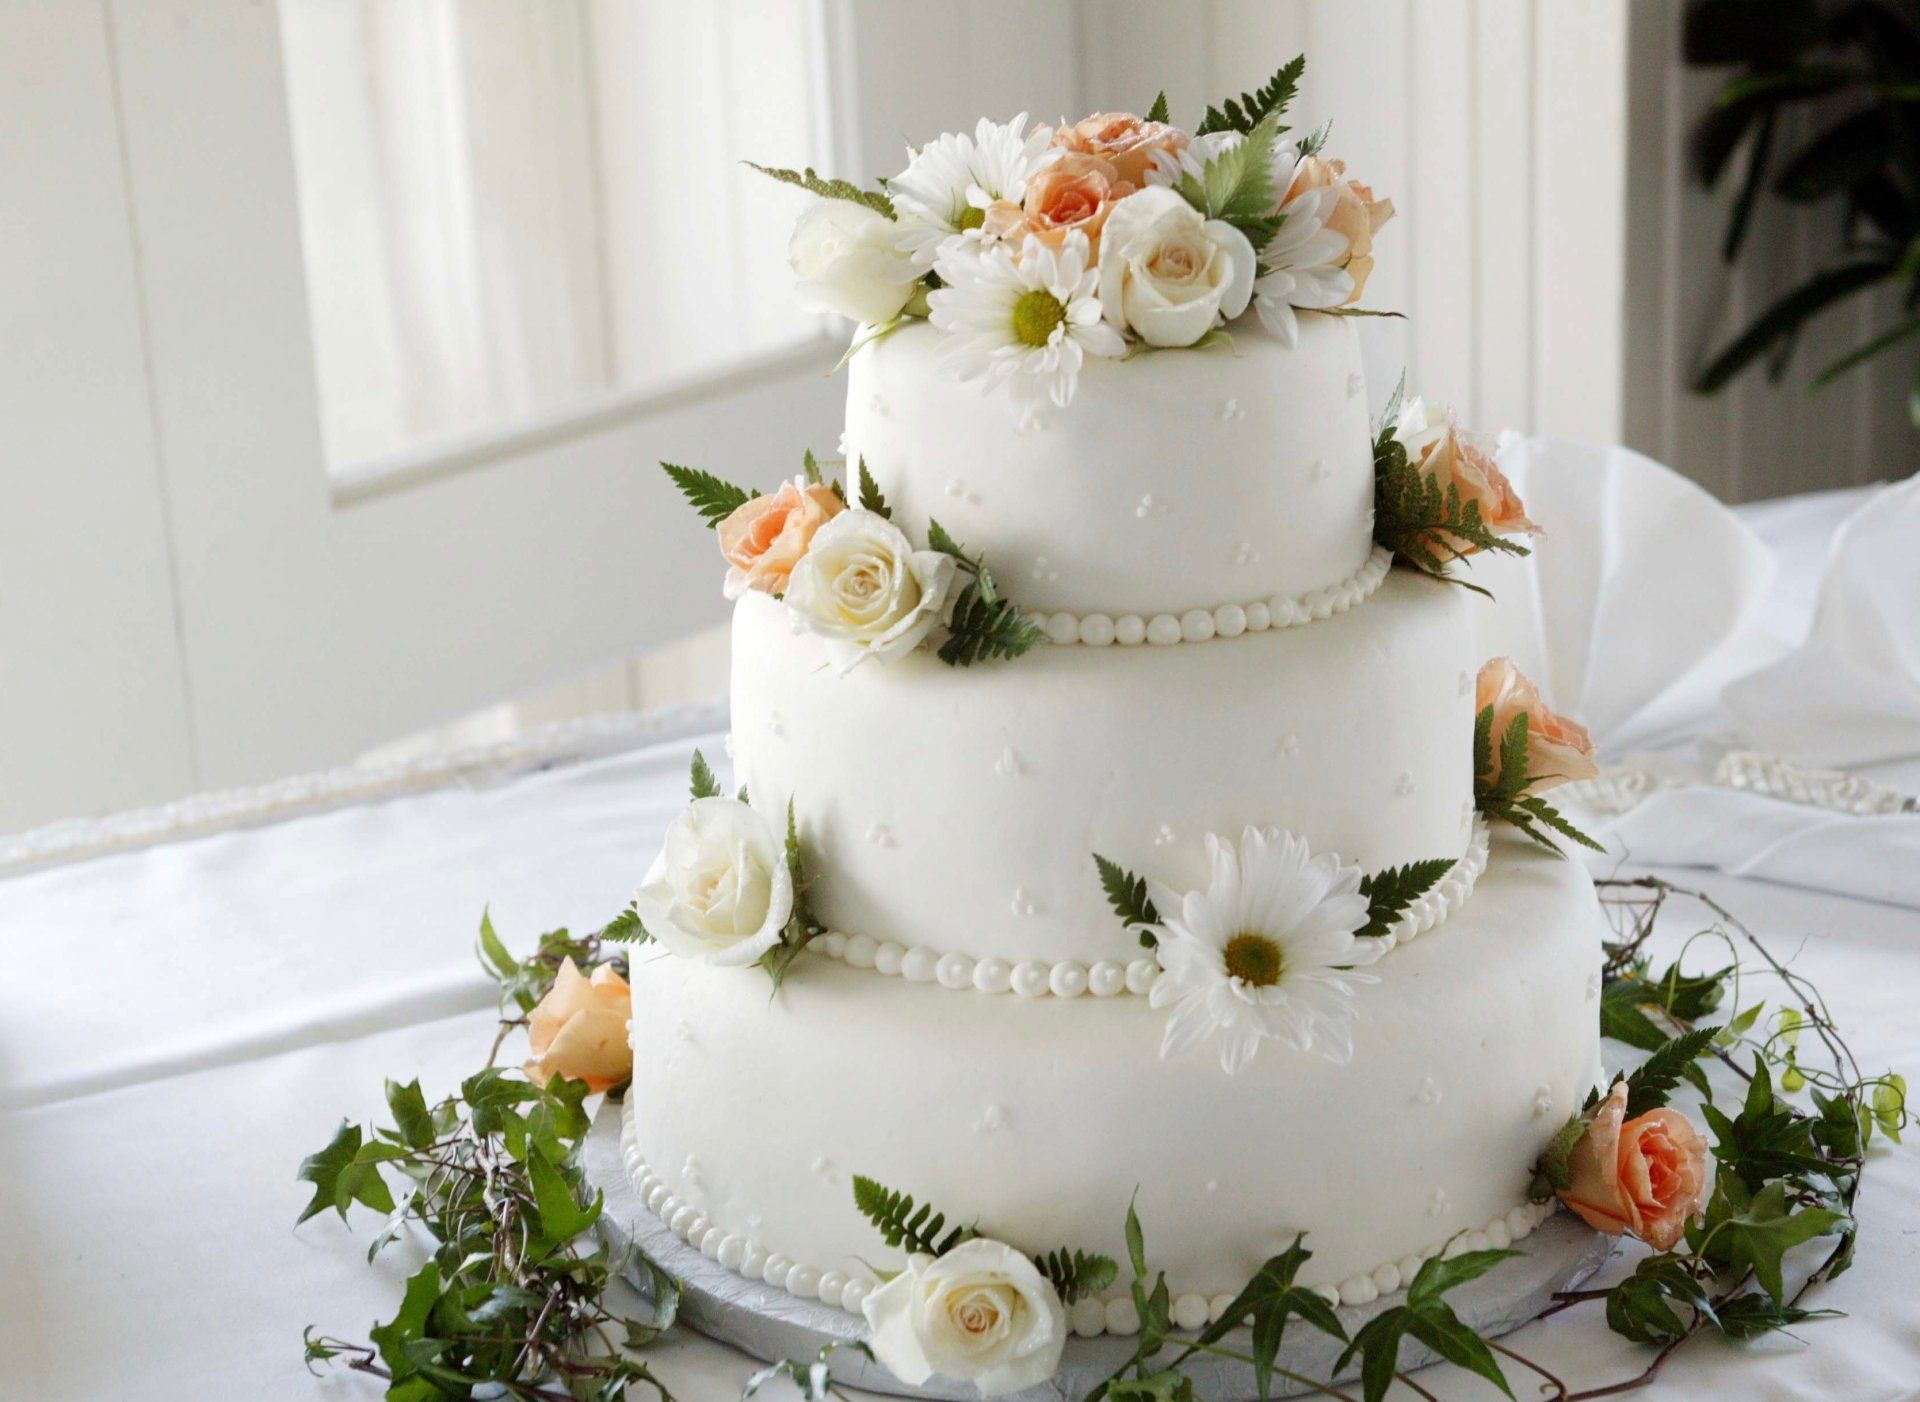 A three tiered wedding cake decorated with flowers and pearls